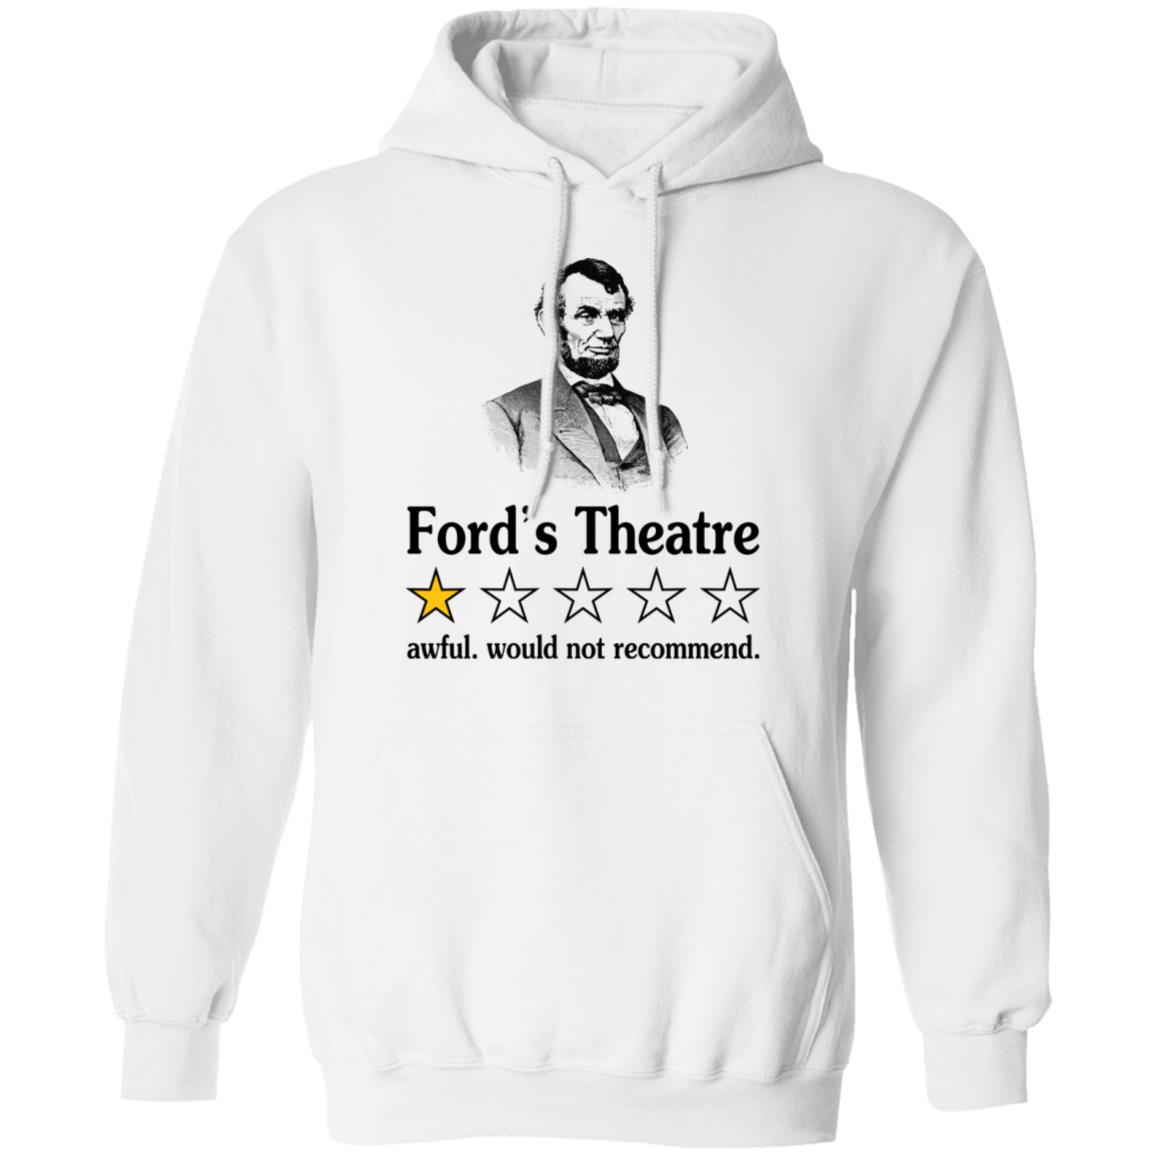 Ford’s Theatre Awful Would Not Recommend Shirt 1